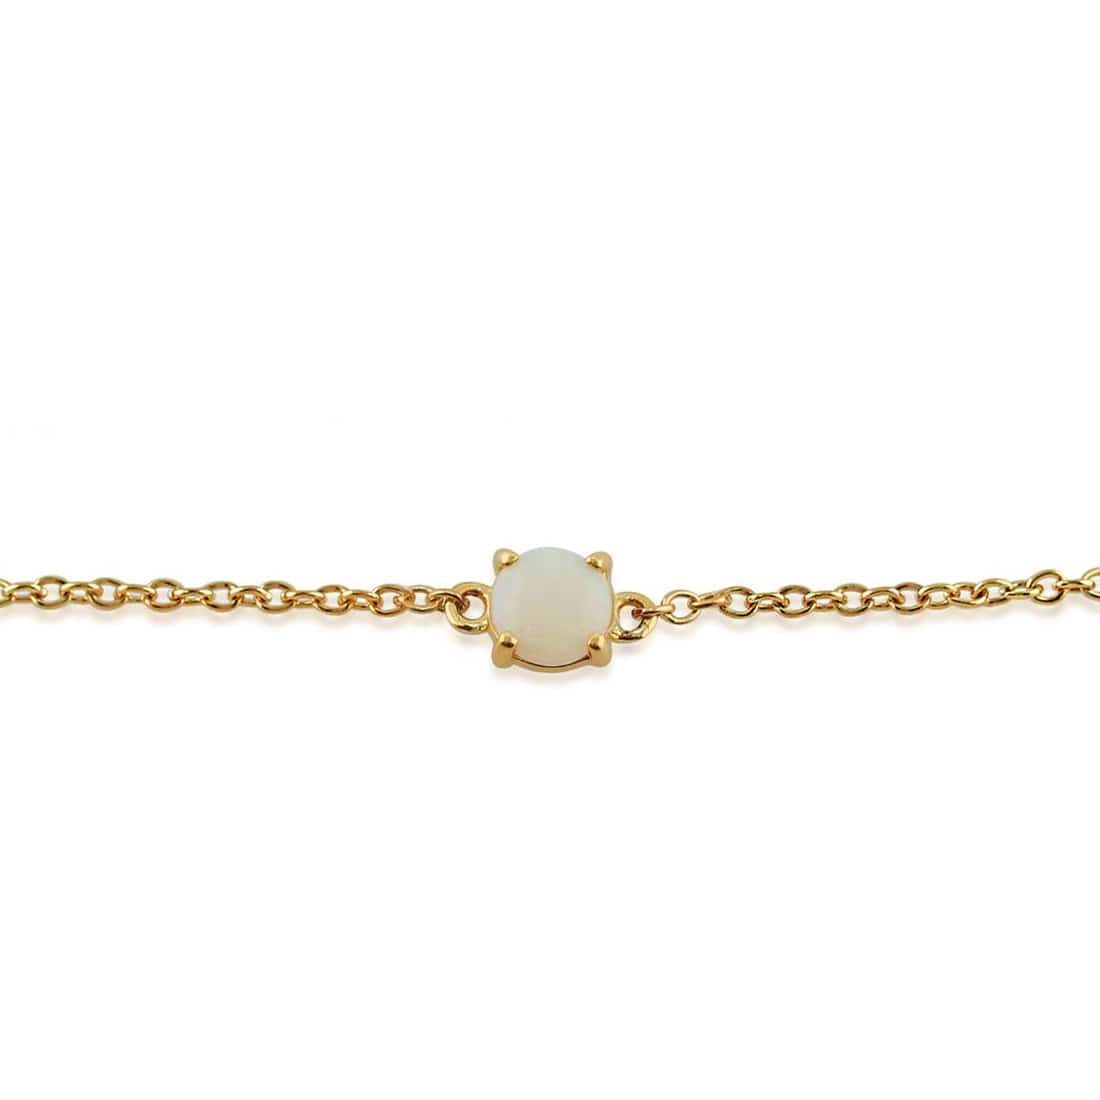 Classic Round Opal Cabochon Bracelet in 9ct Yellow Gold - Gemondo